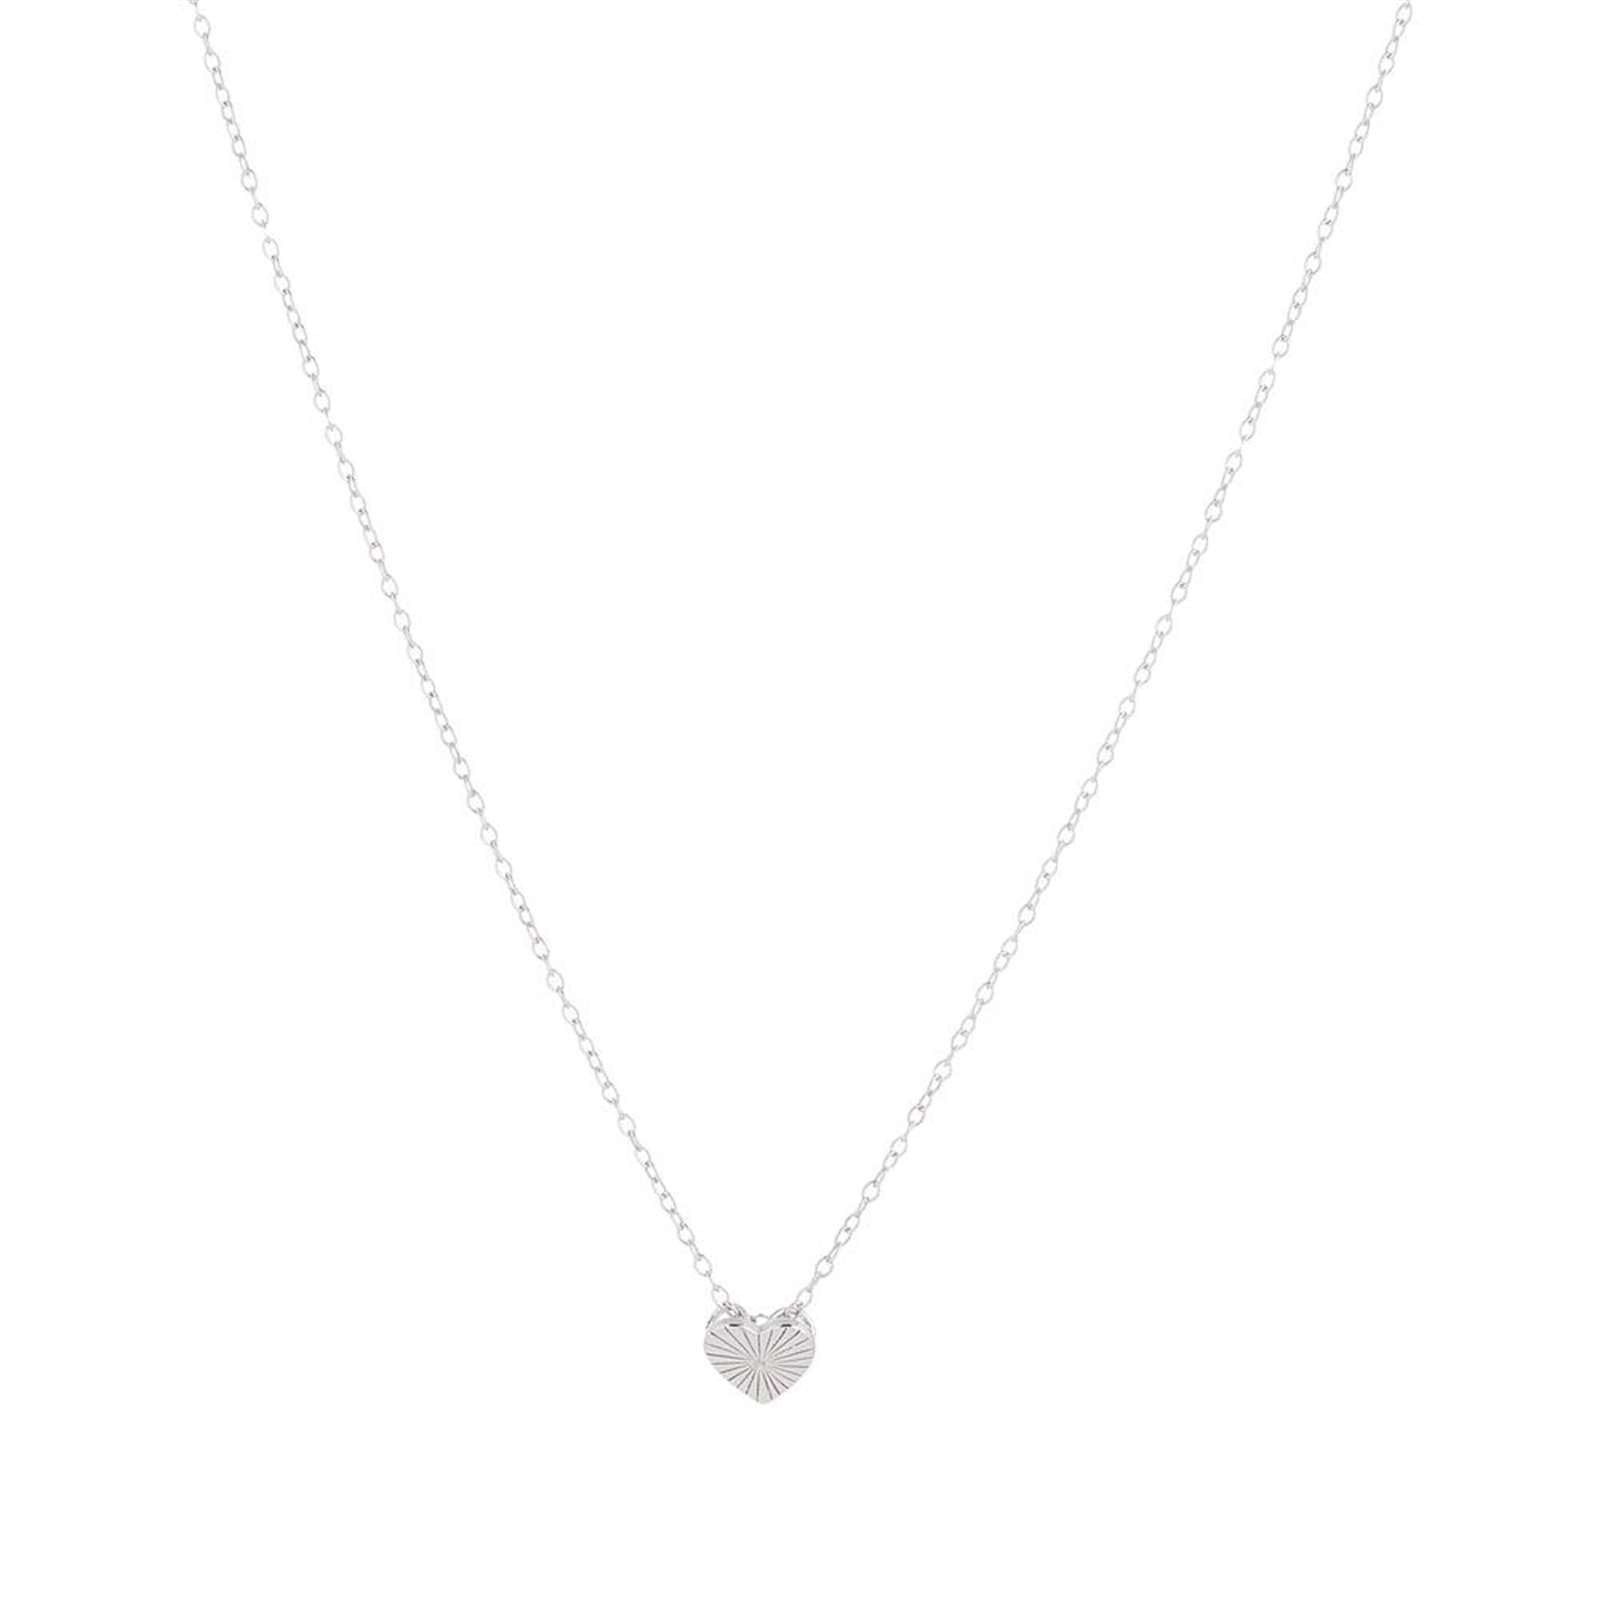 Athra Women Small Textured Heart Necklace With Extension